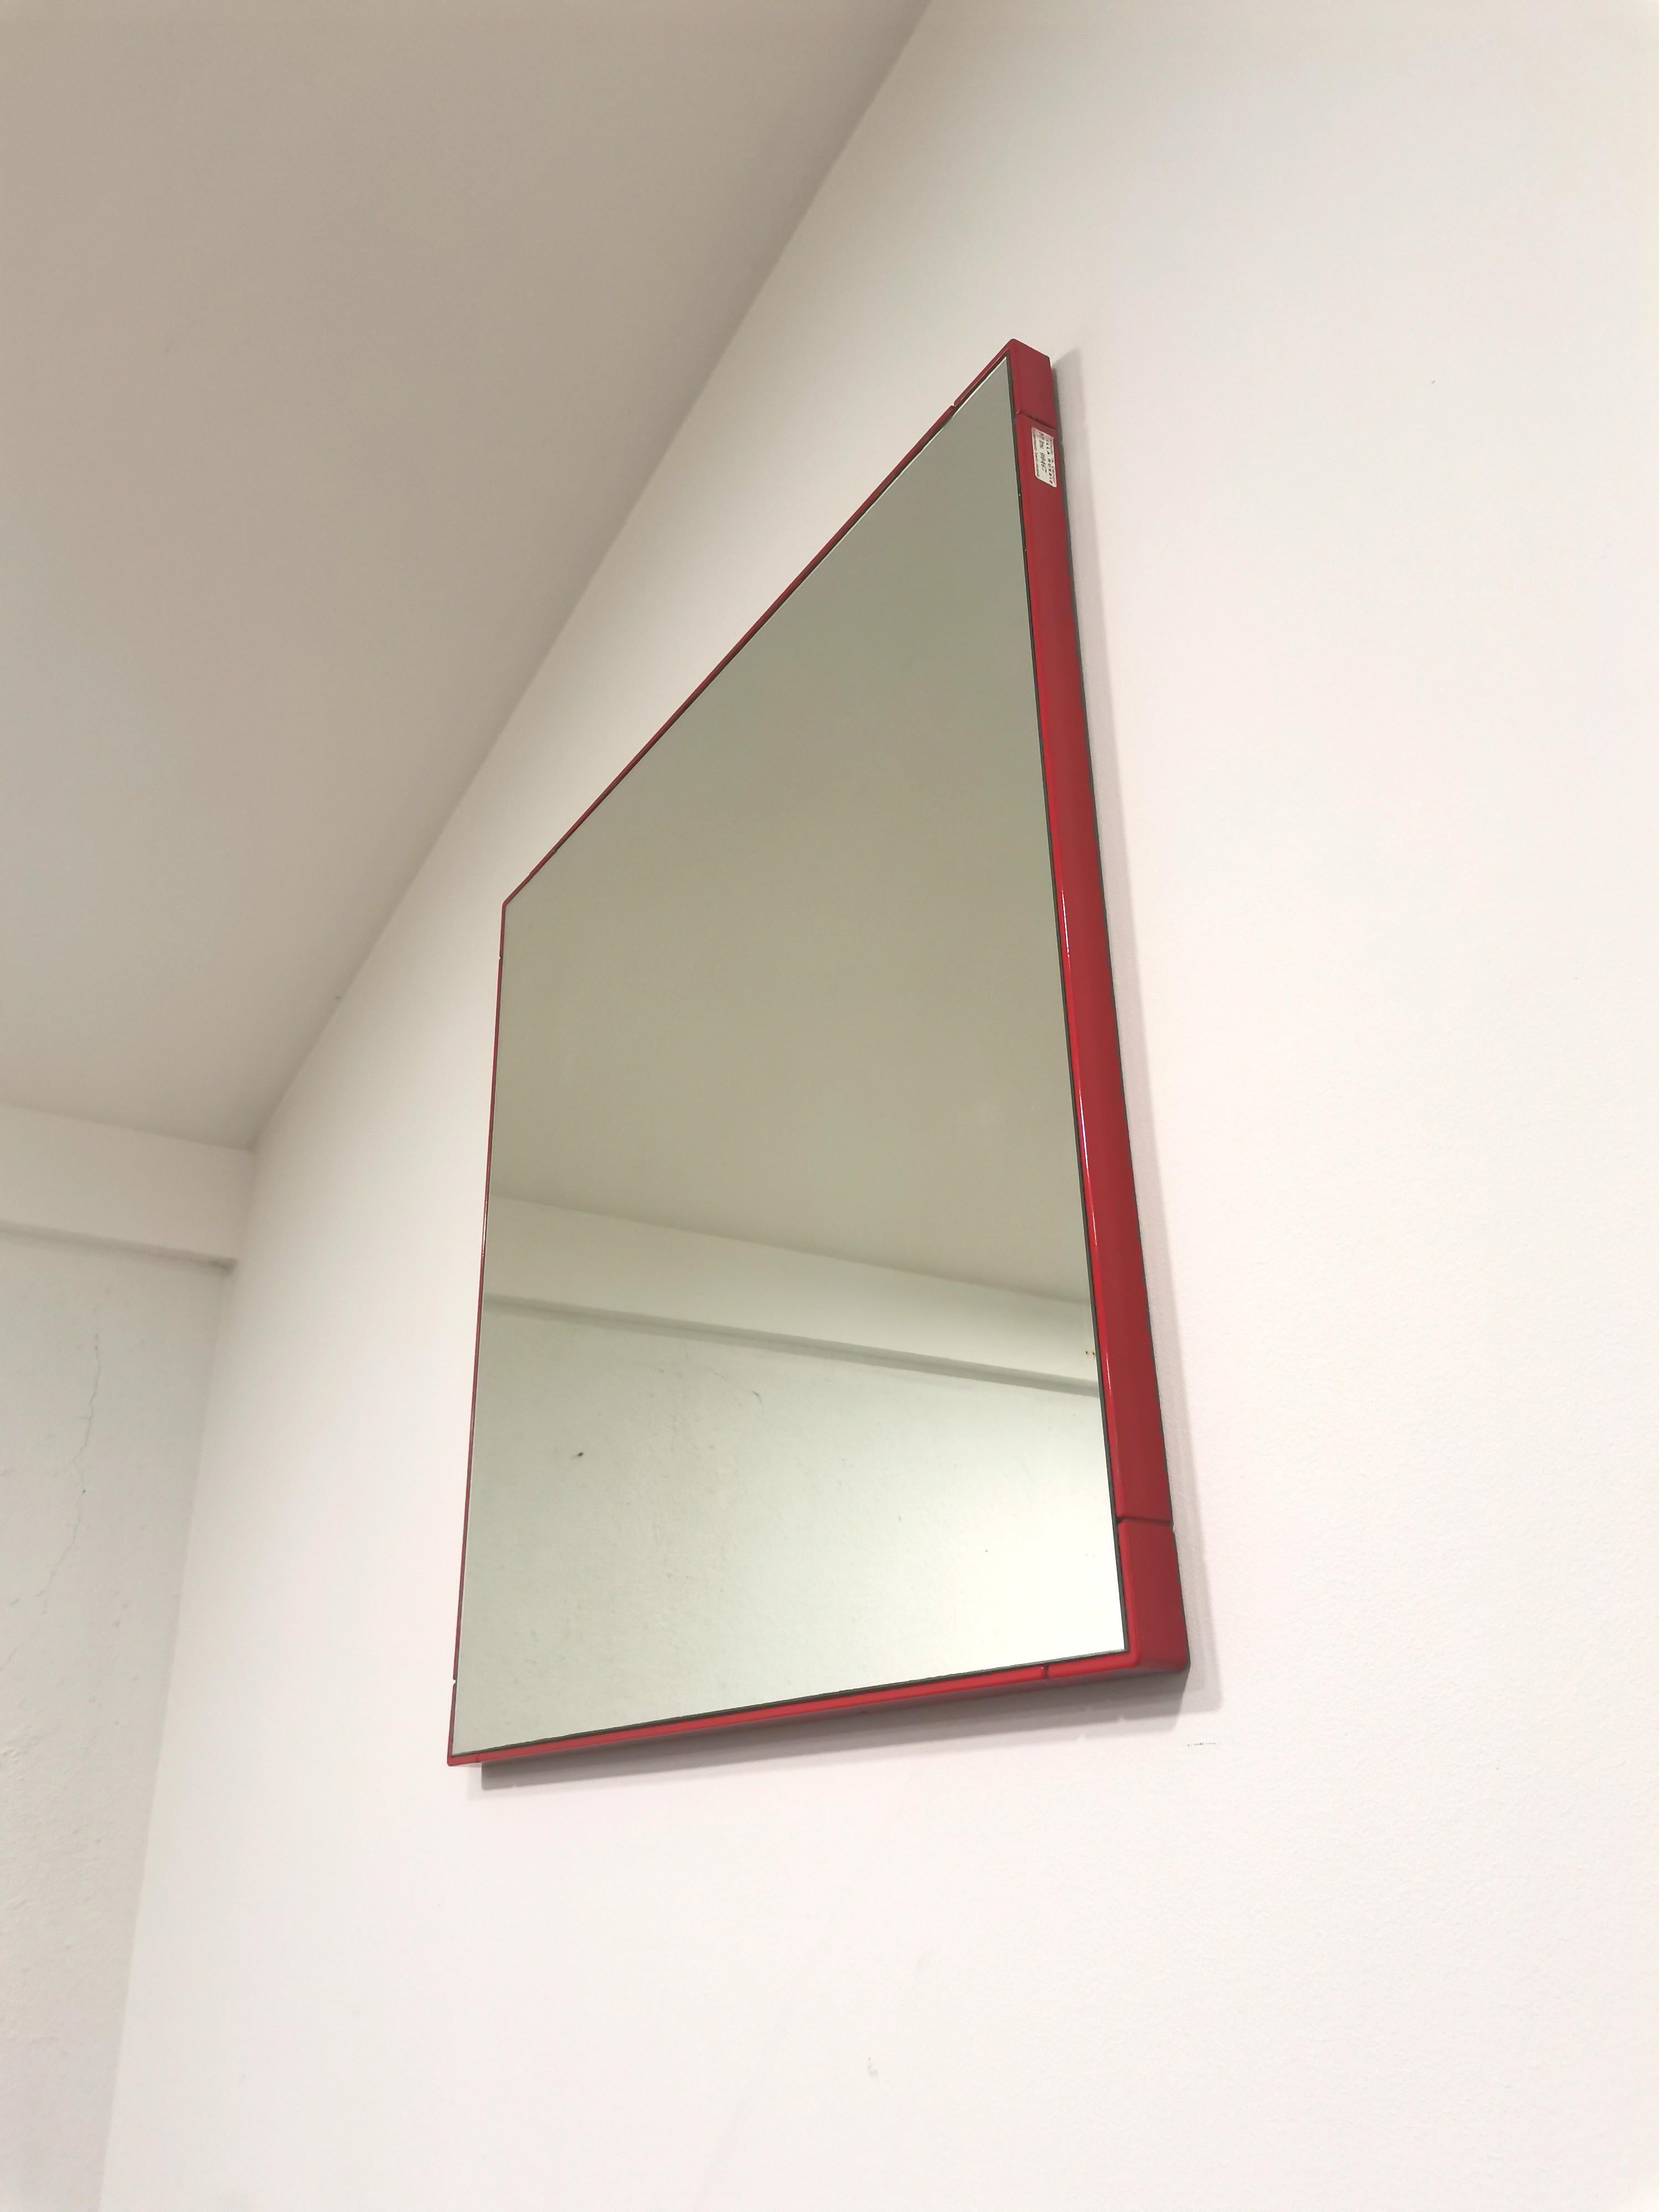 Vintage Italian Mirror. Made in 1970s. Simplicity of form and eternal design. This mirror will upgrade any room with its minimalistic aesthetic and vivid red colour. 

Material: plastic, mirror.

Condition:v ery good vintage condition with some